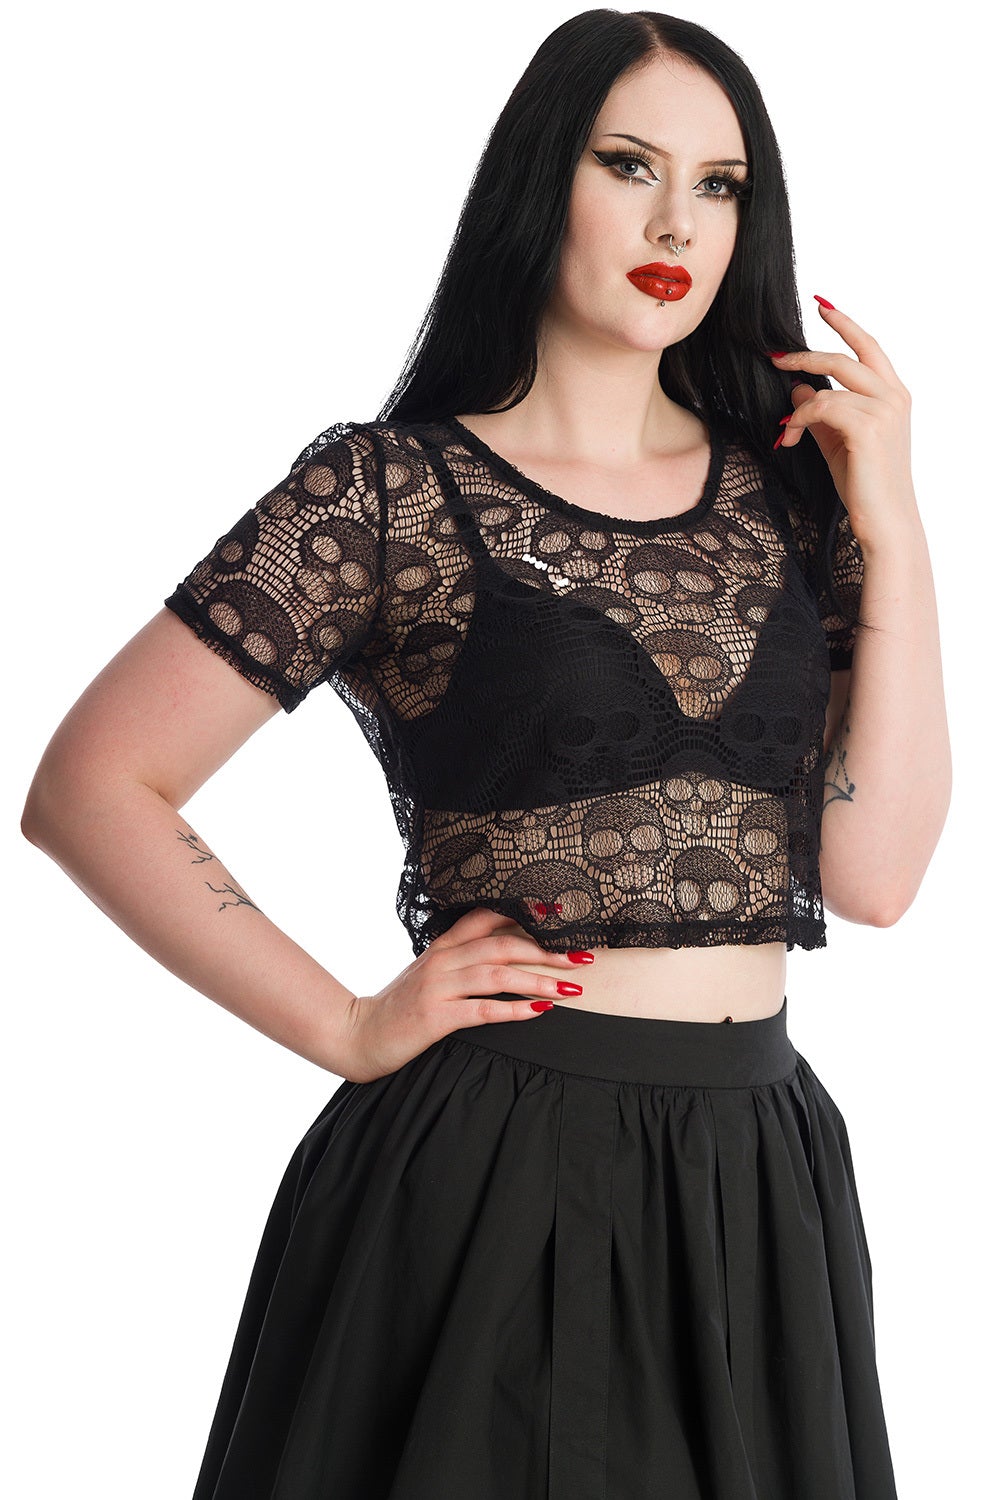 Black Lace Skull See Through Crop Top by Banned Alternative – Banned  Alternative Europe